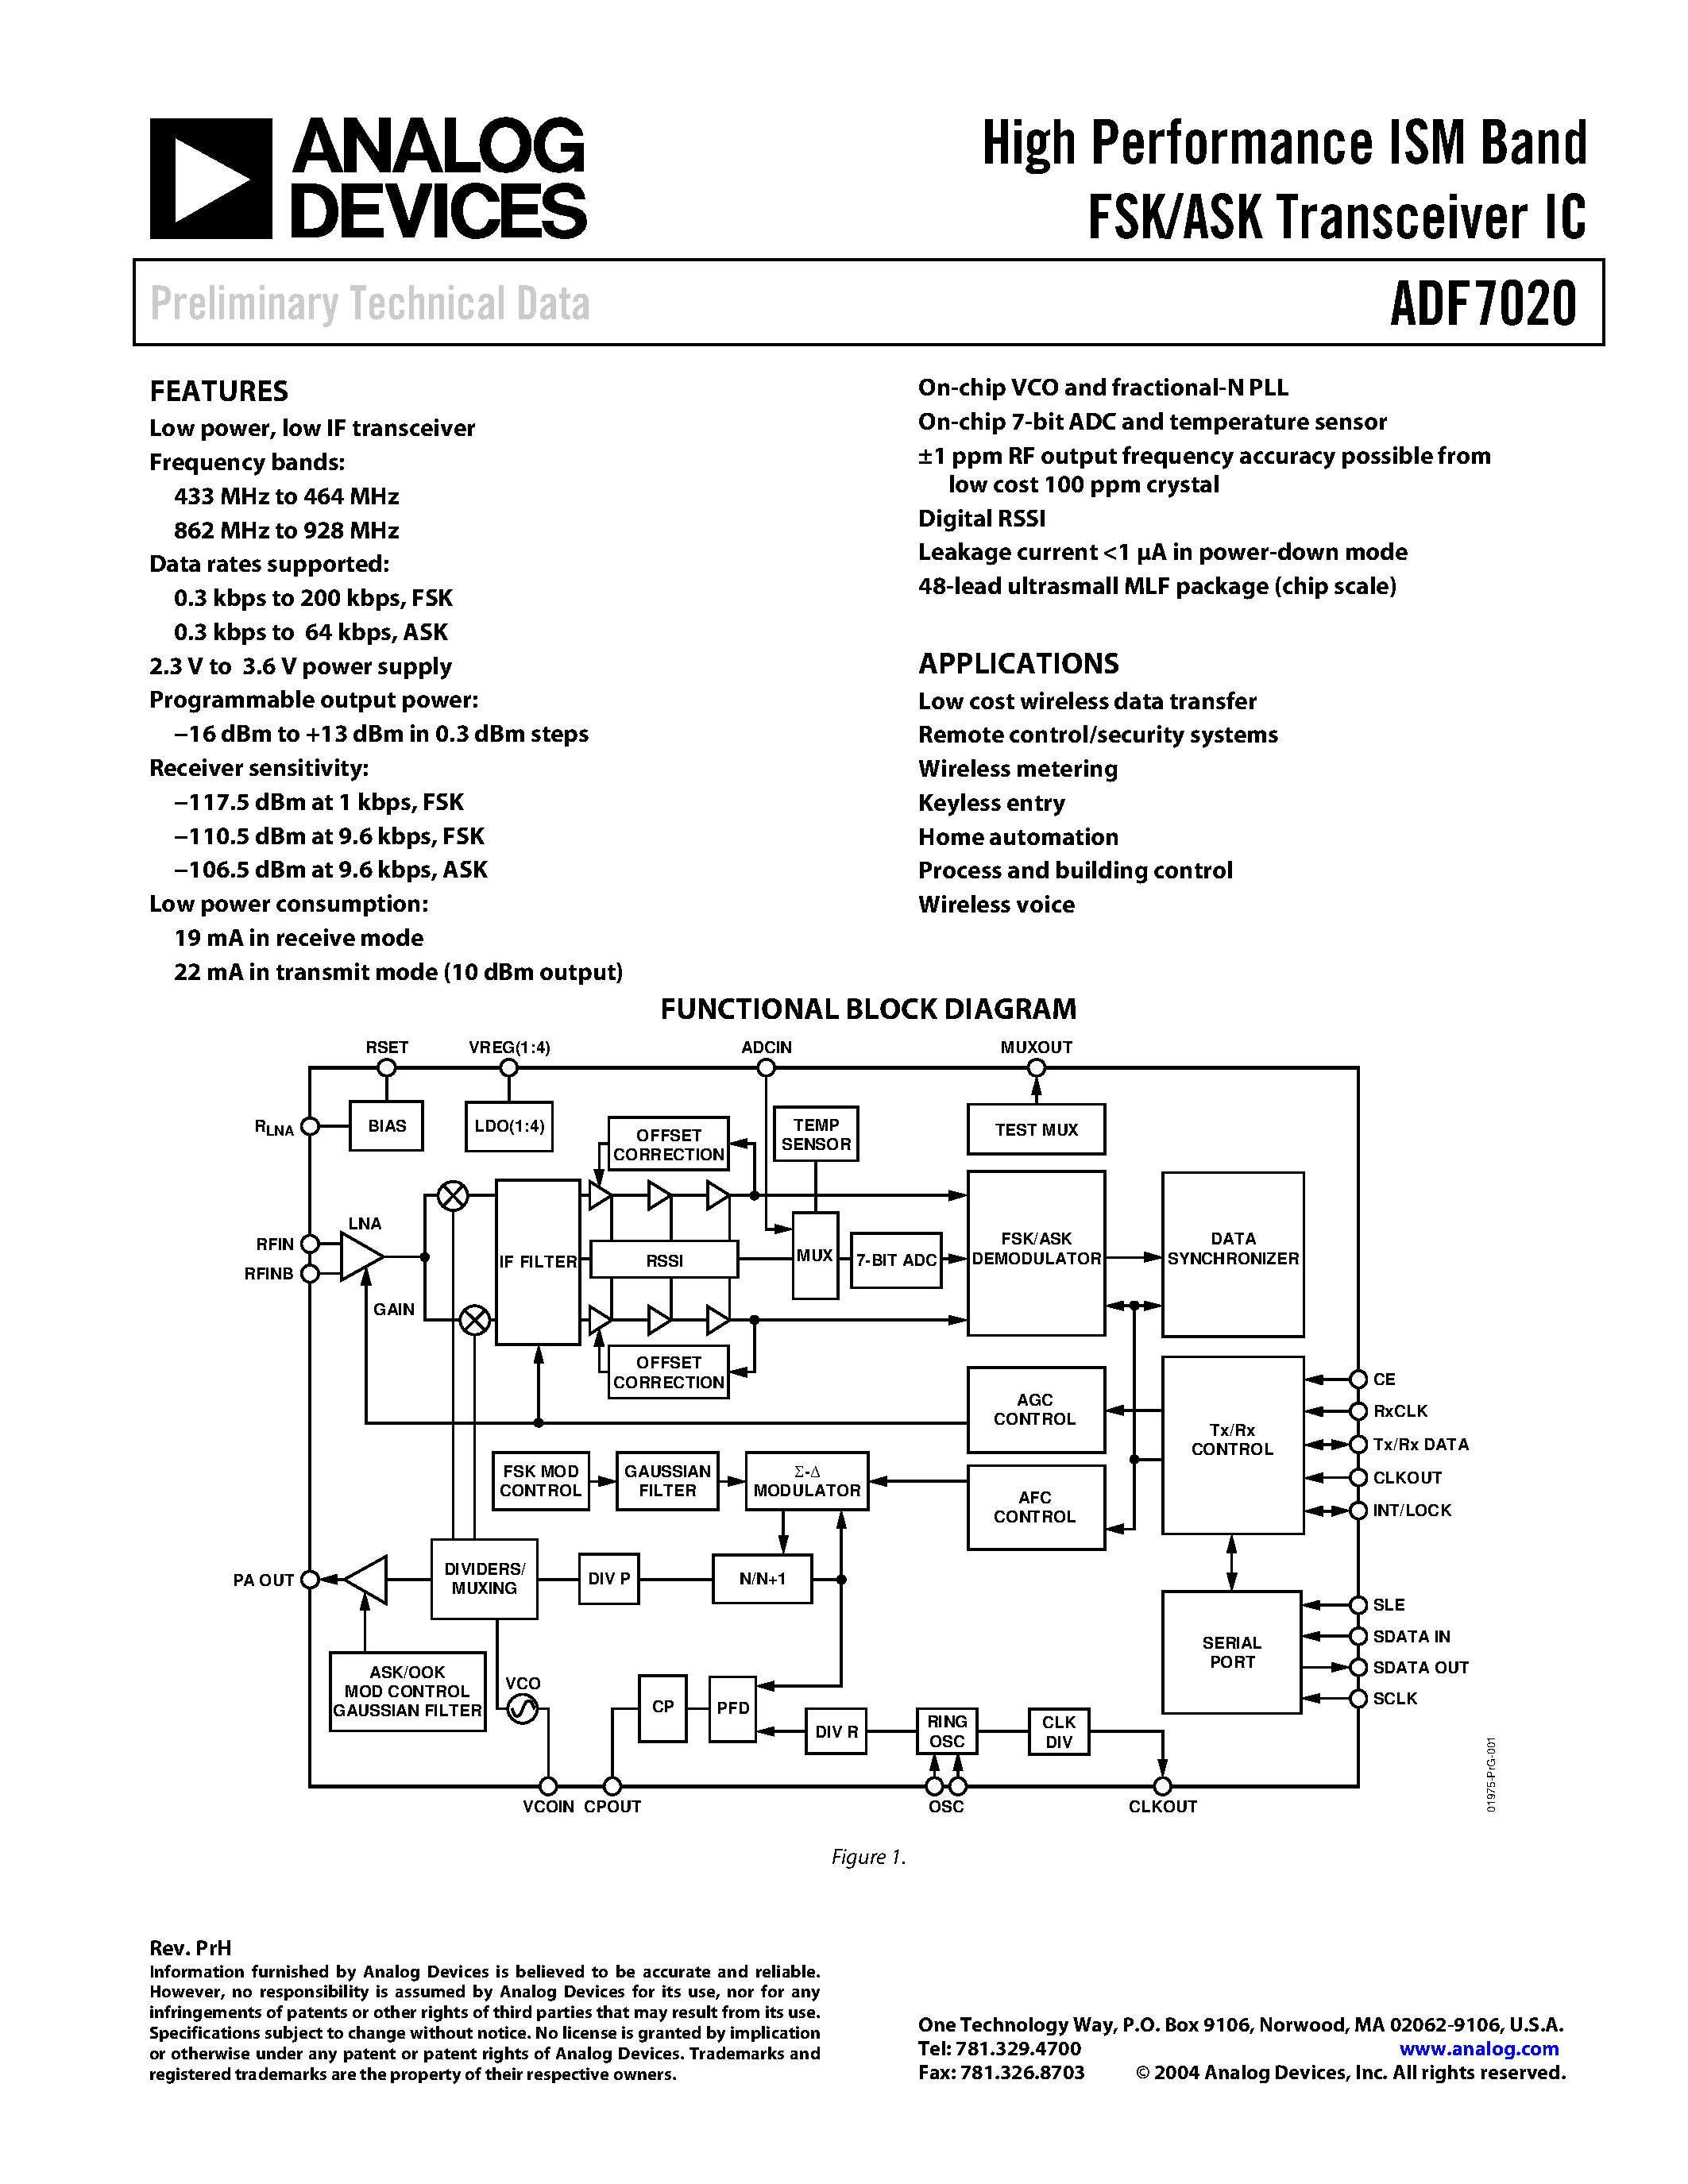 Datasheet ADF7020BCP - High Performance ISM Band FSK/ASK Transceiver IC page 1